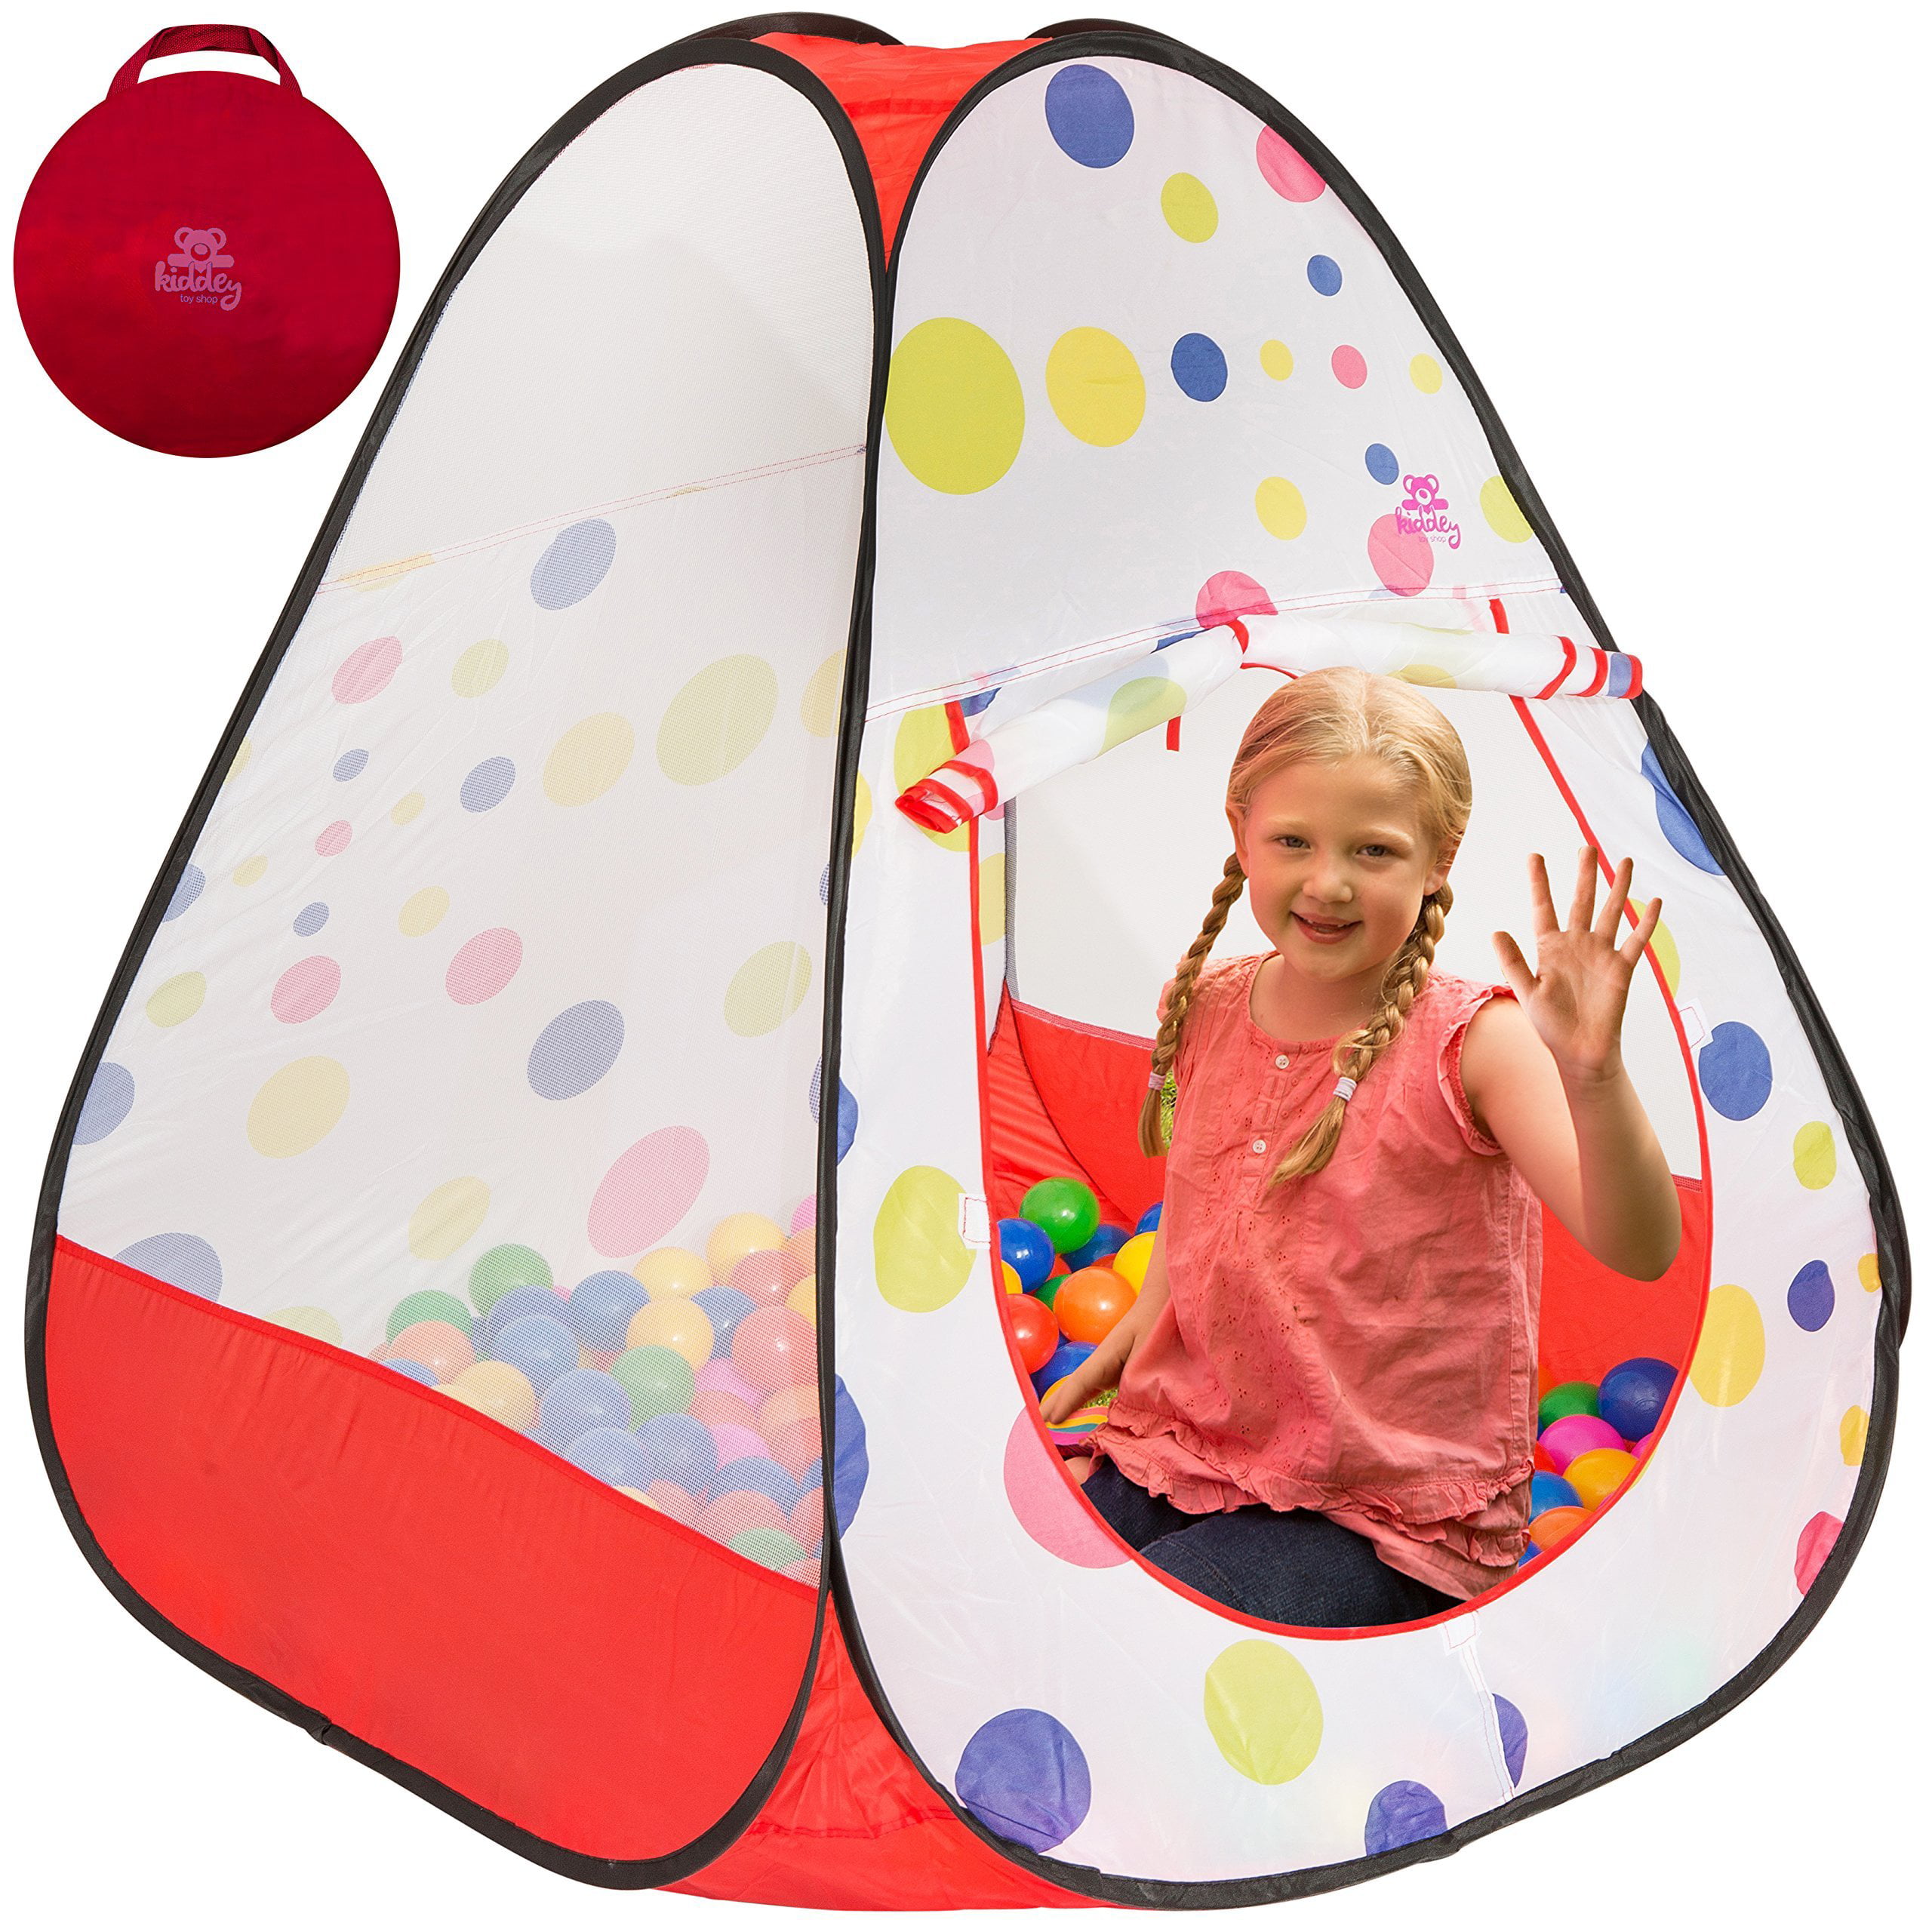 Promotes Creativity Kiddey Kids Play Tent with Convenient Carry Case for Easy Storage and Travel Pops Up no Assembly Required Imagination Early Learning Great Playhouse Tent for Indoor/Outdoor 